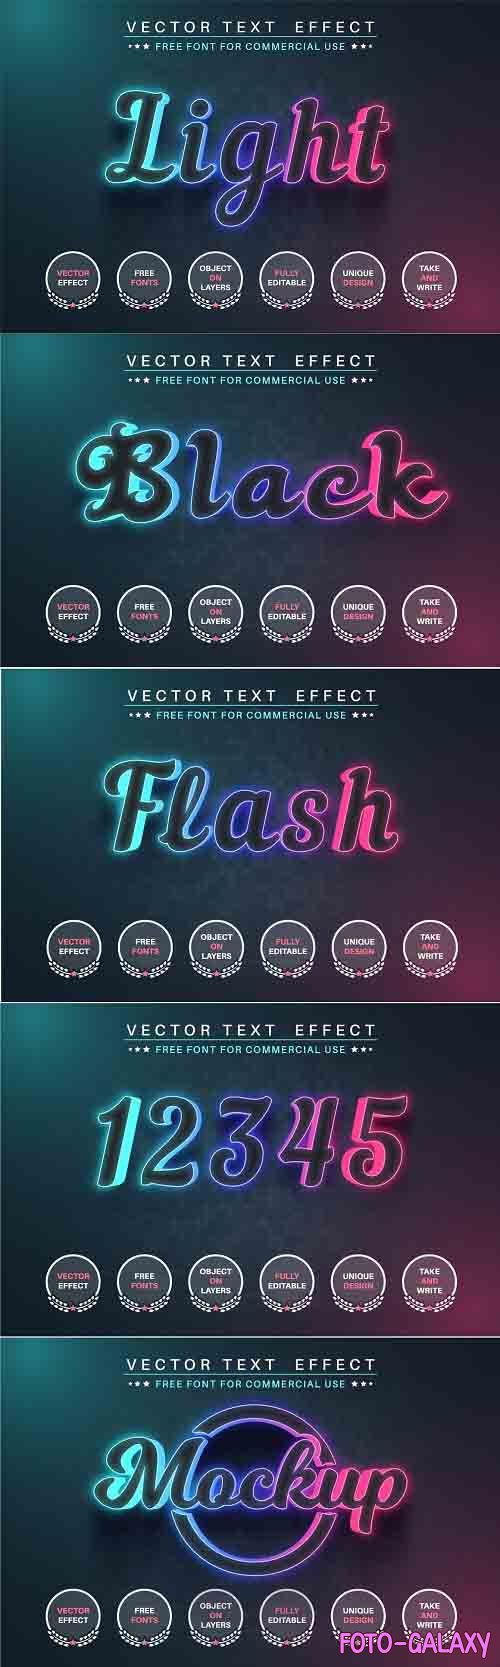 Color glow - editable text effect - 6145212